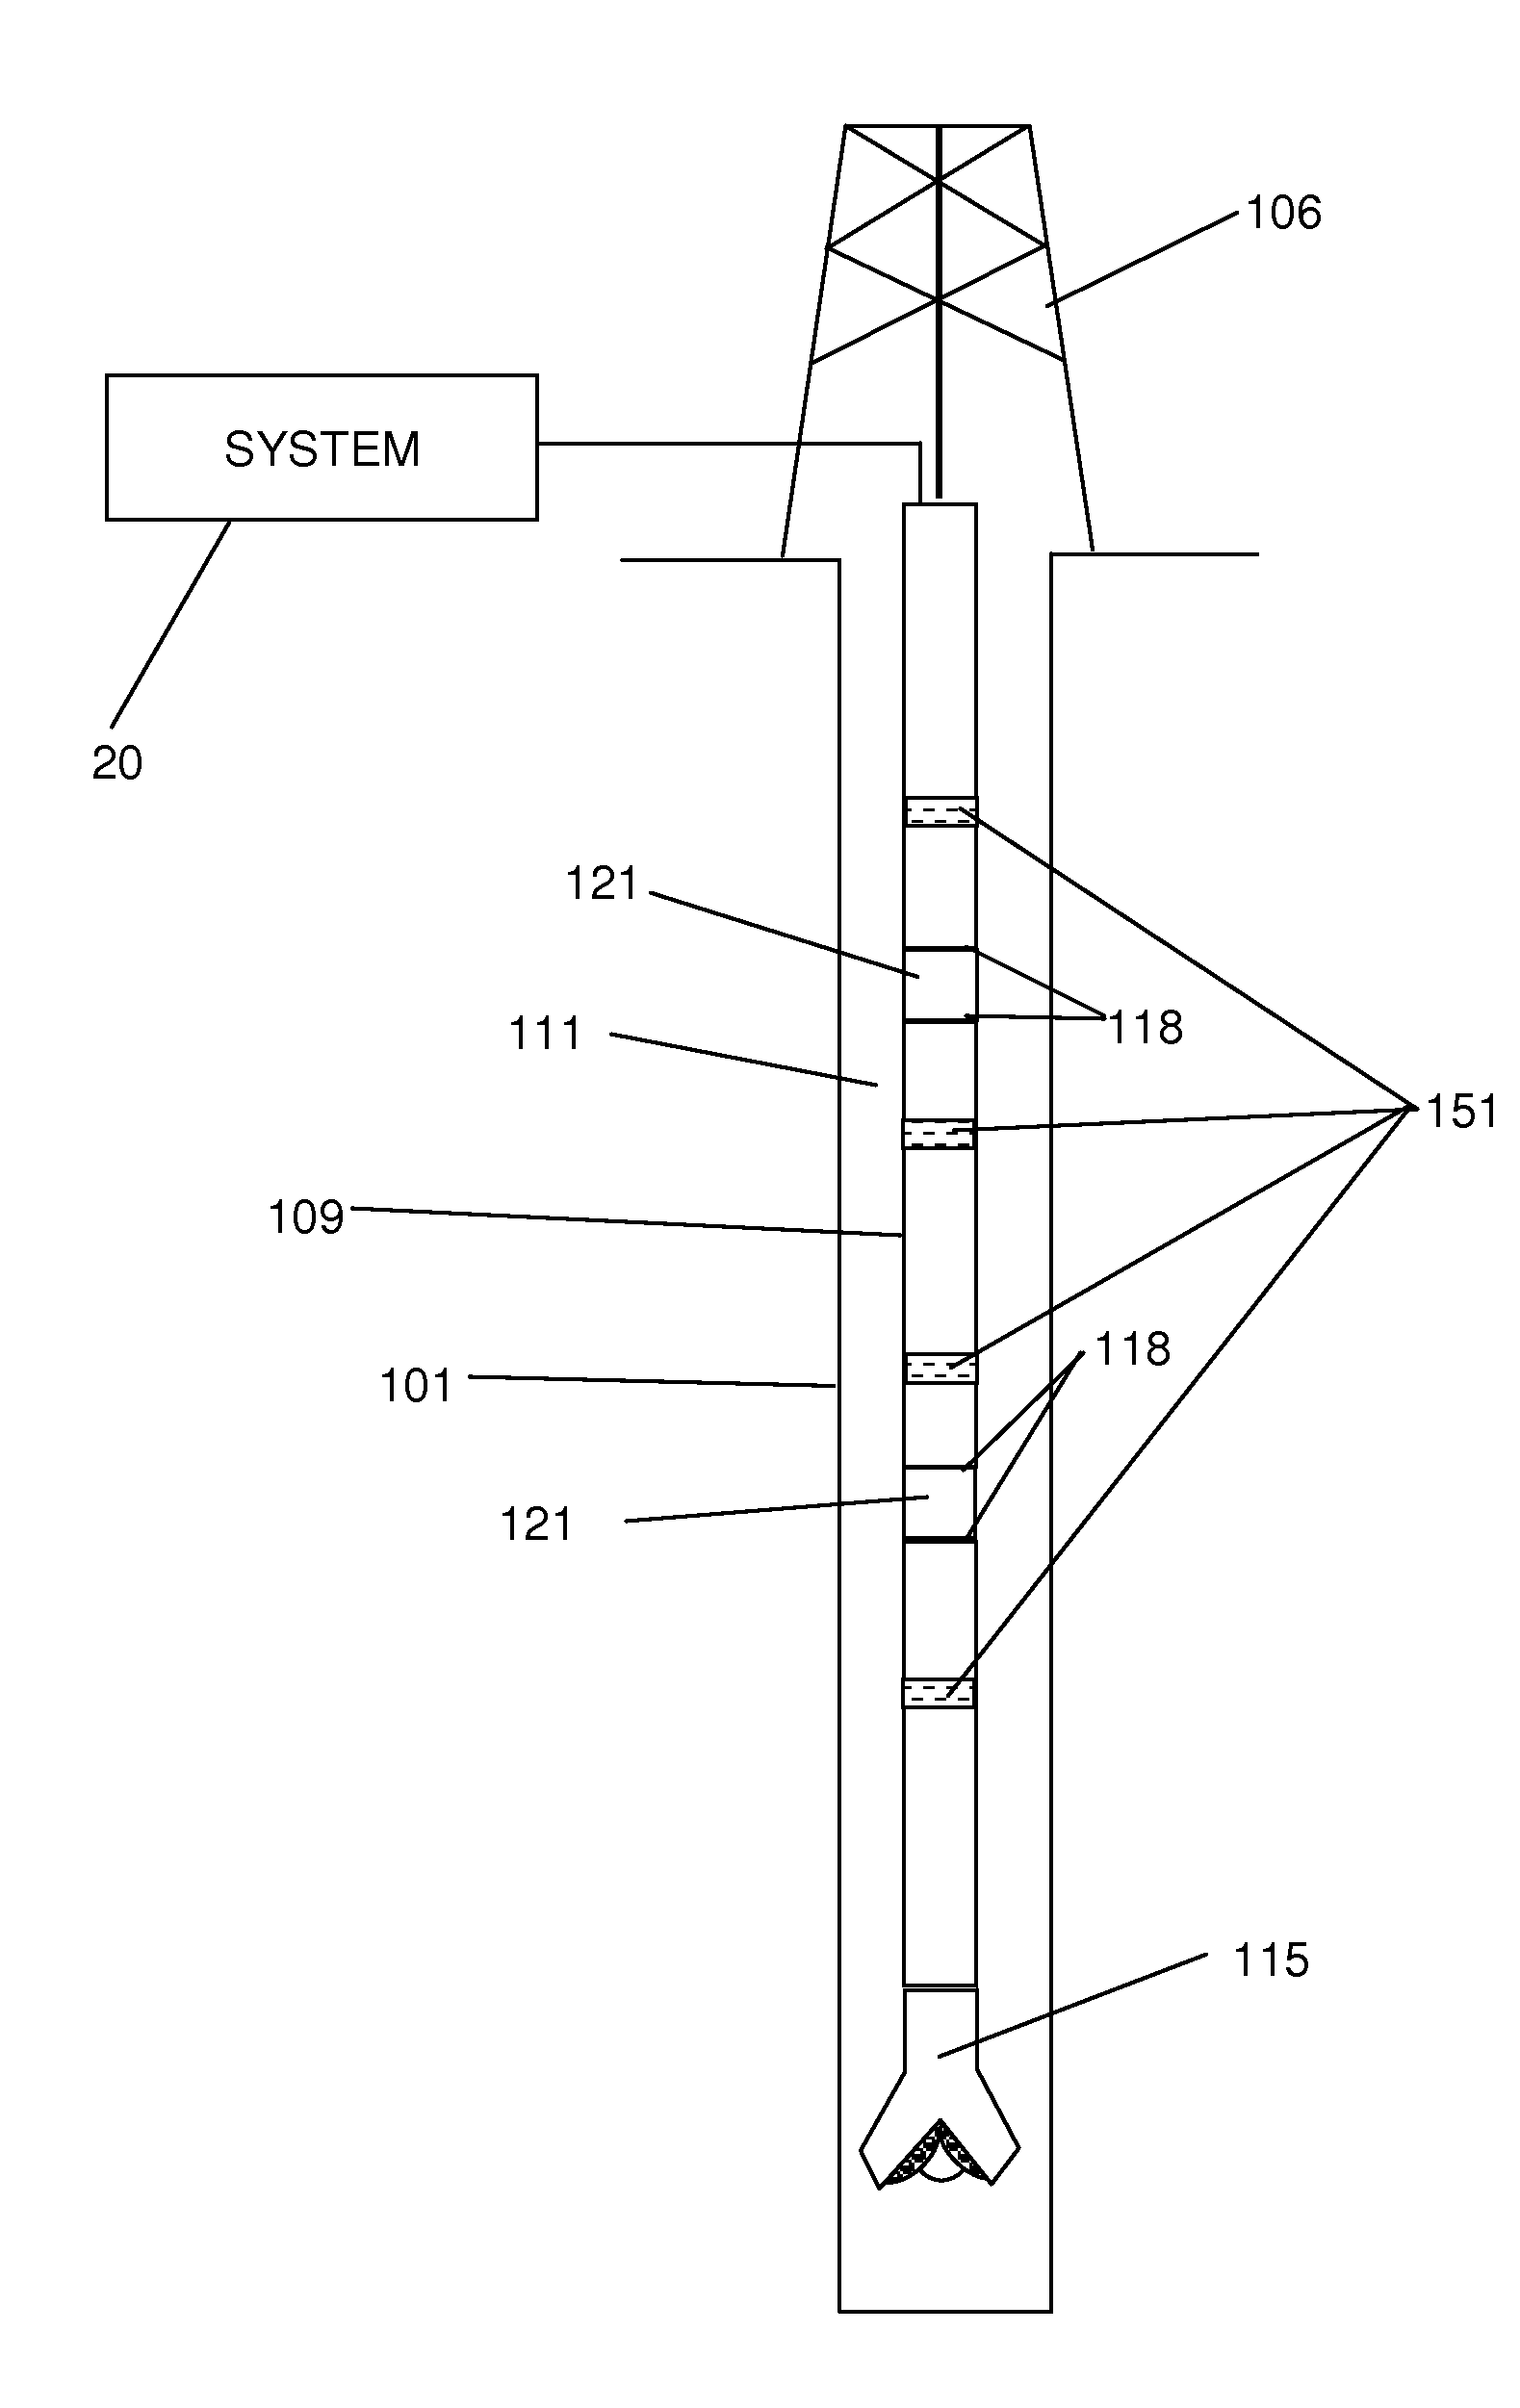 Method of determining borehole conditions from distributed measurement data